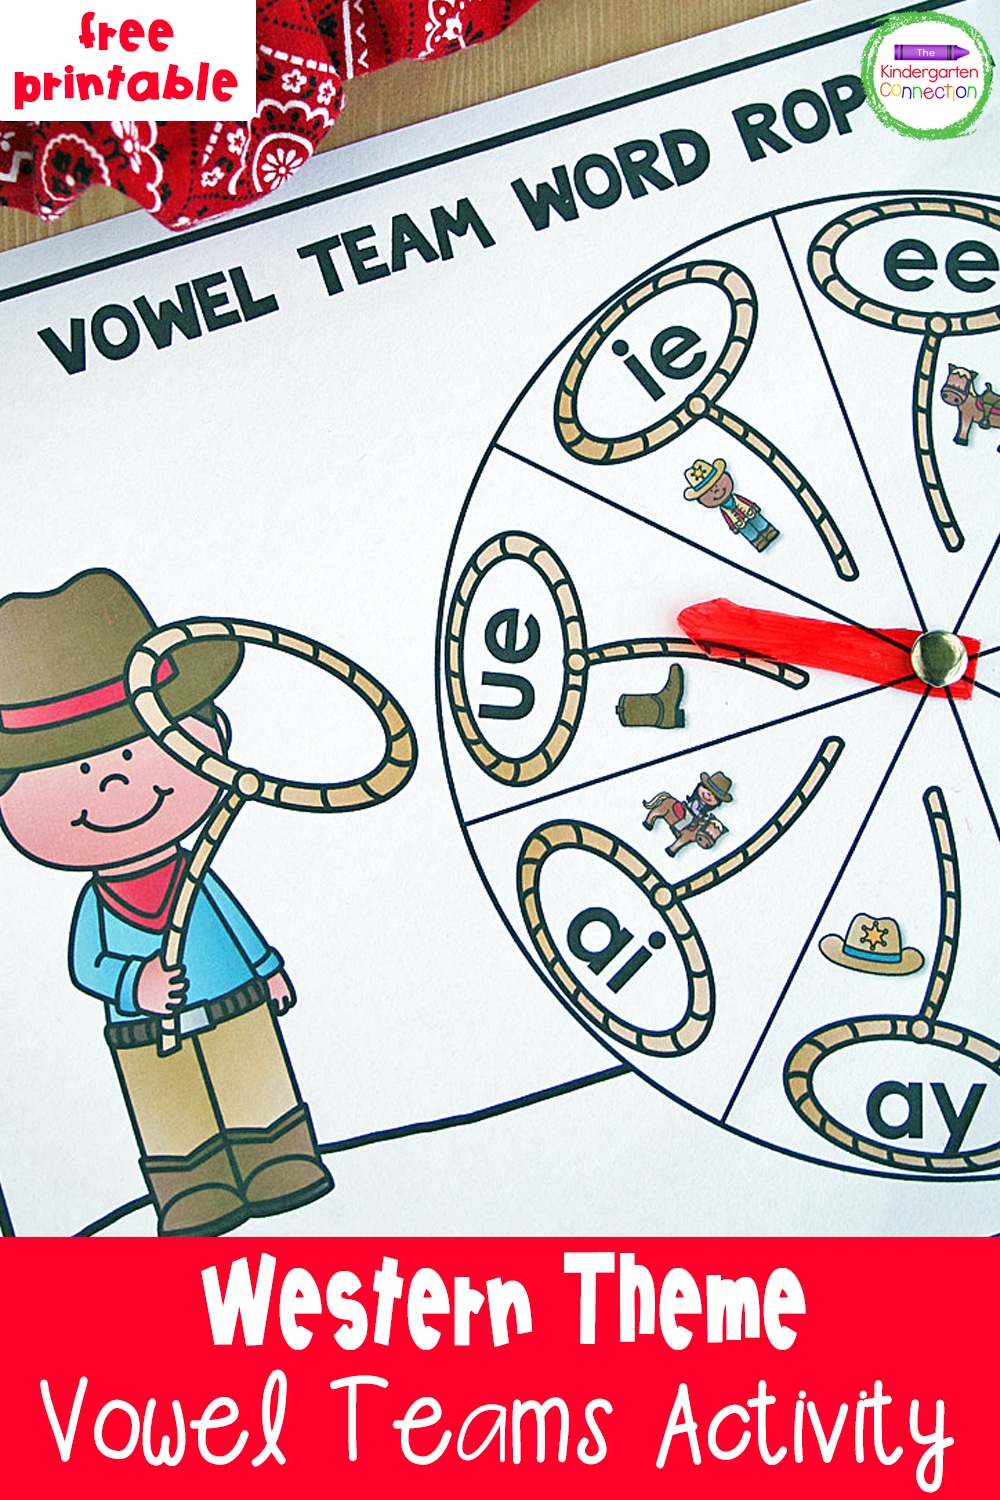 Howdy partner! Are your kids ready for some vowel teams review? This western theme word work activity is an engaging way to get some practice in.